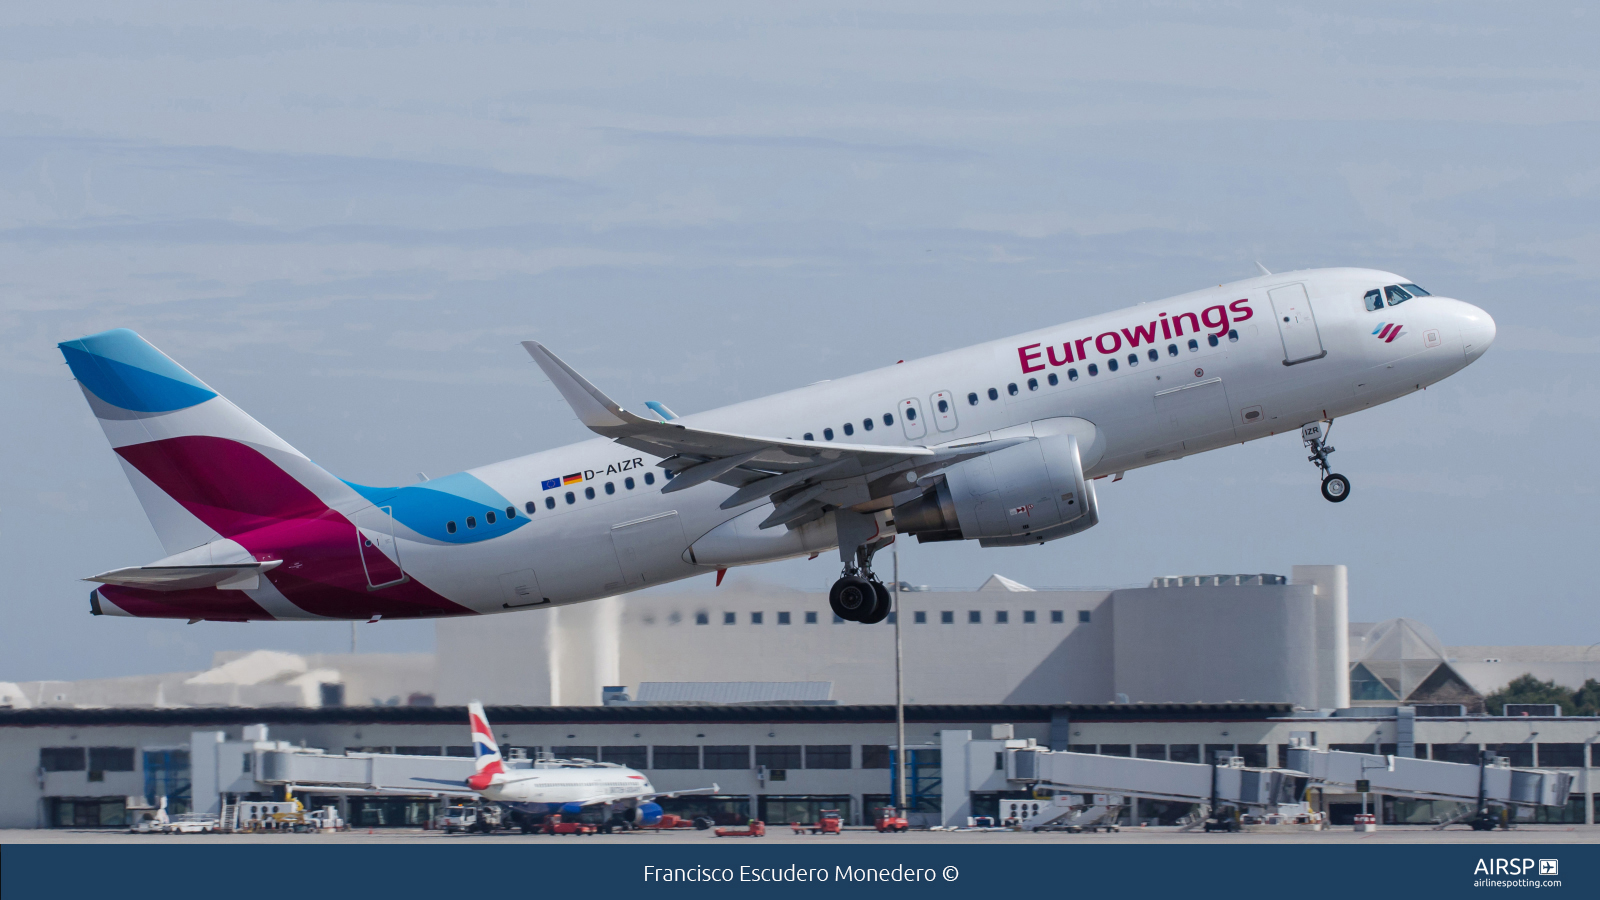 Eurowings  Airbus A320  D-AIZR